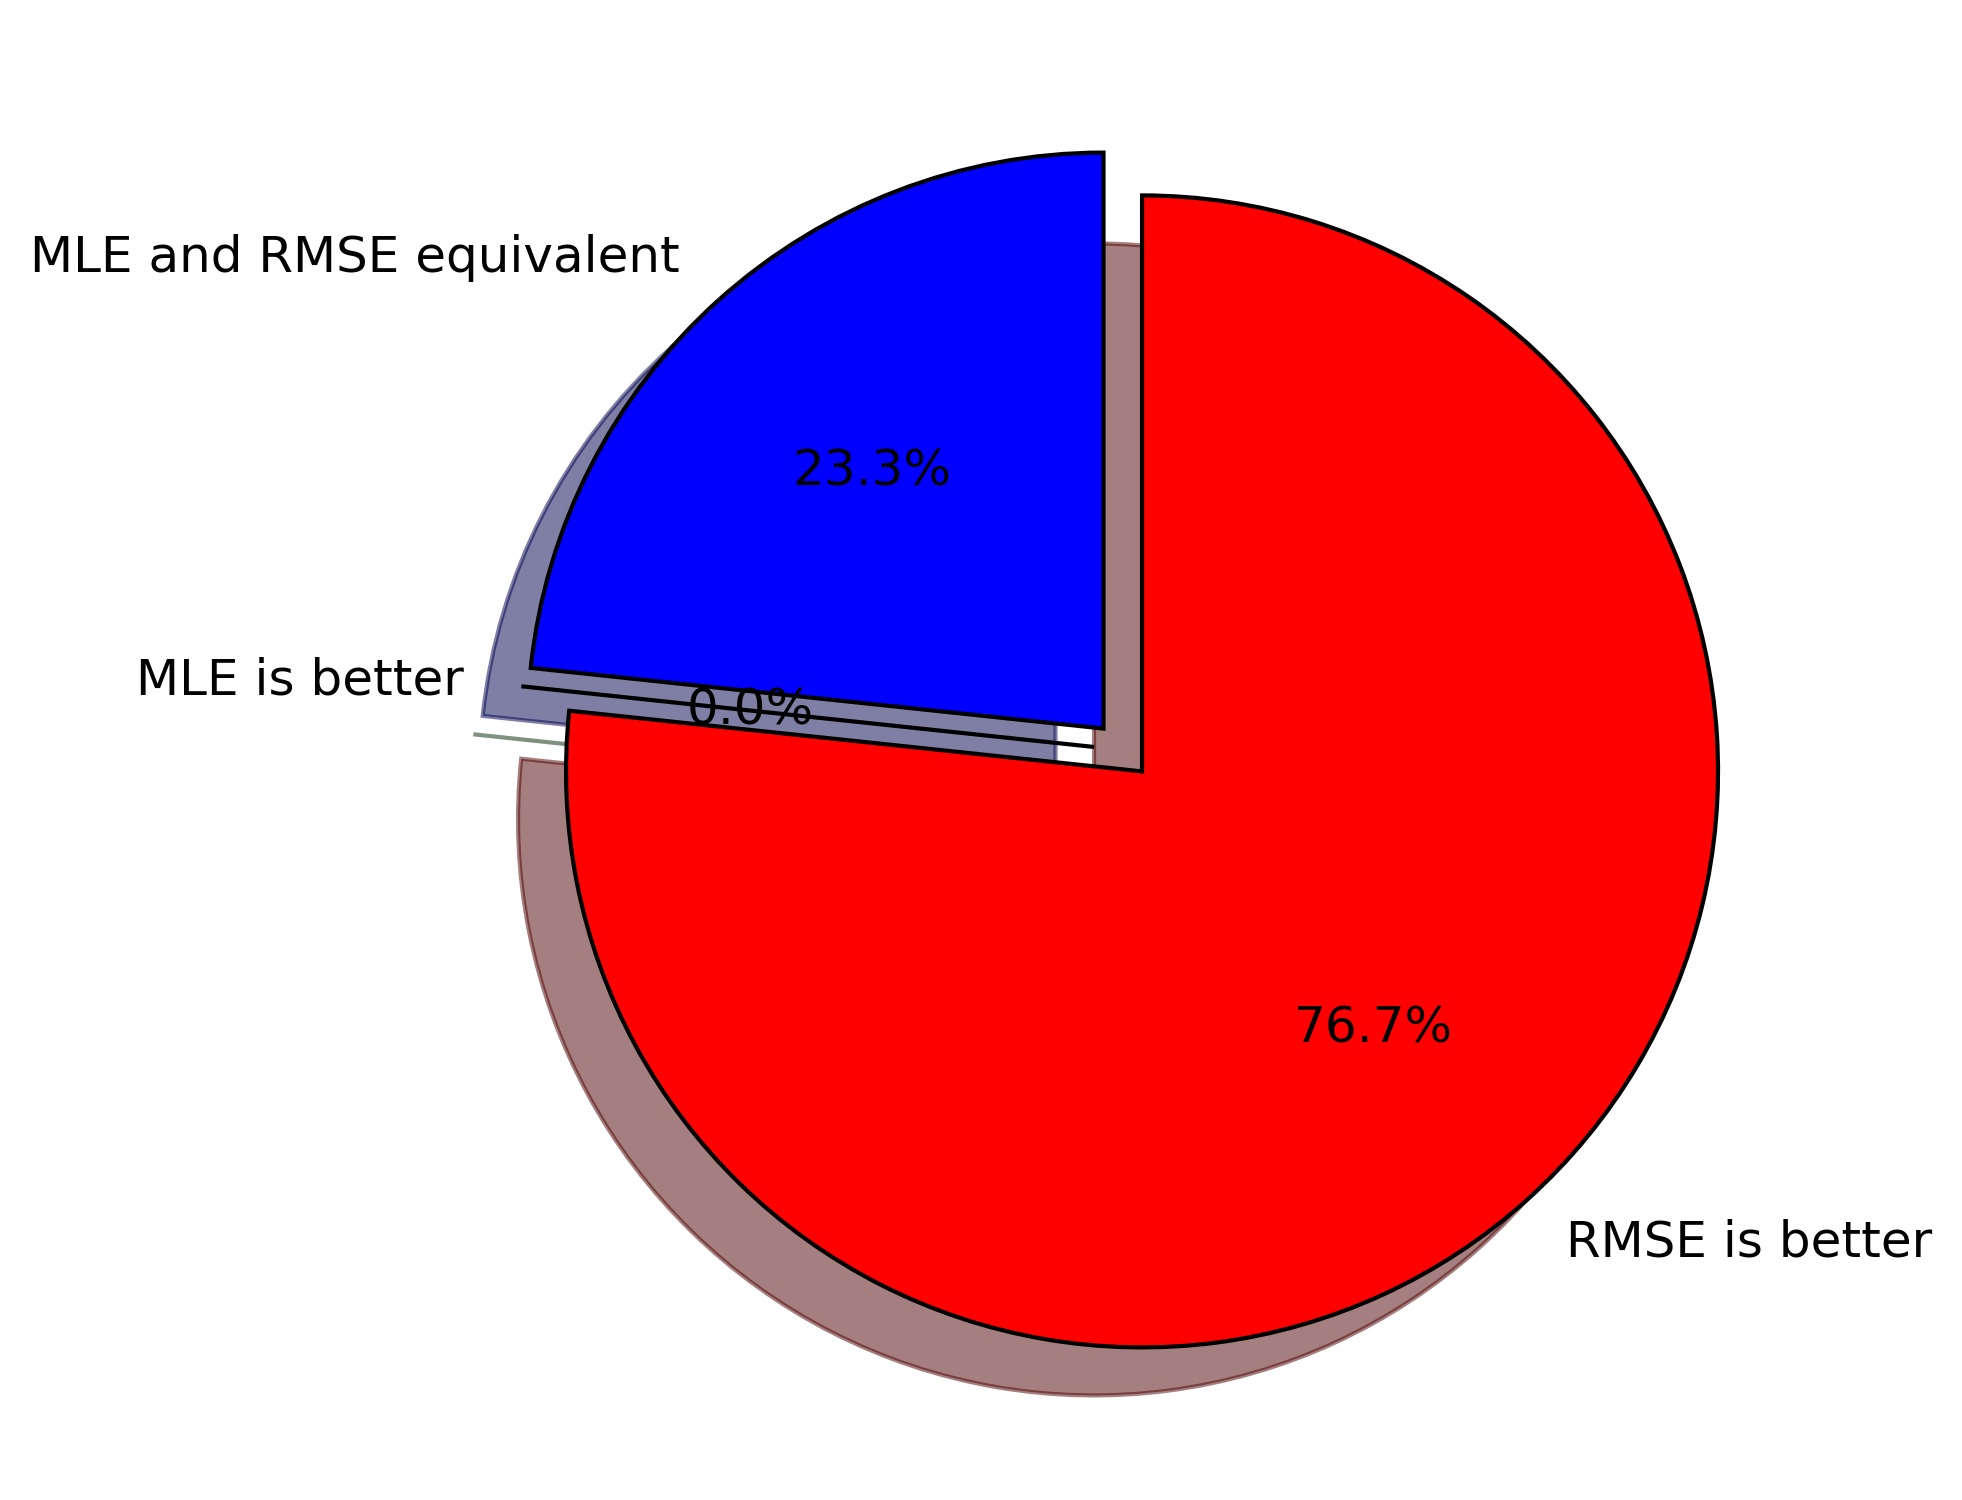 MLE and RMSE equivalent 23.3% of time. RMSE was better 76.7% of the time. Never was MLE better.